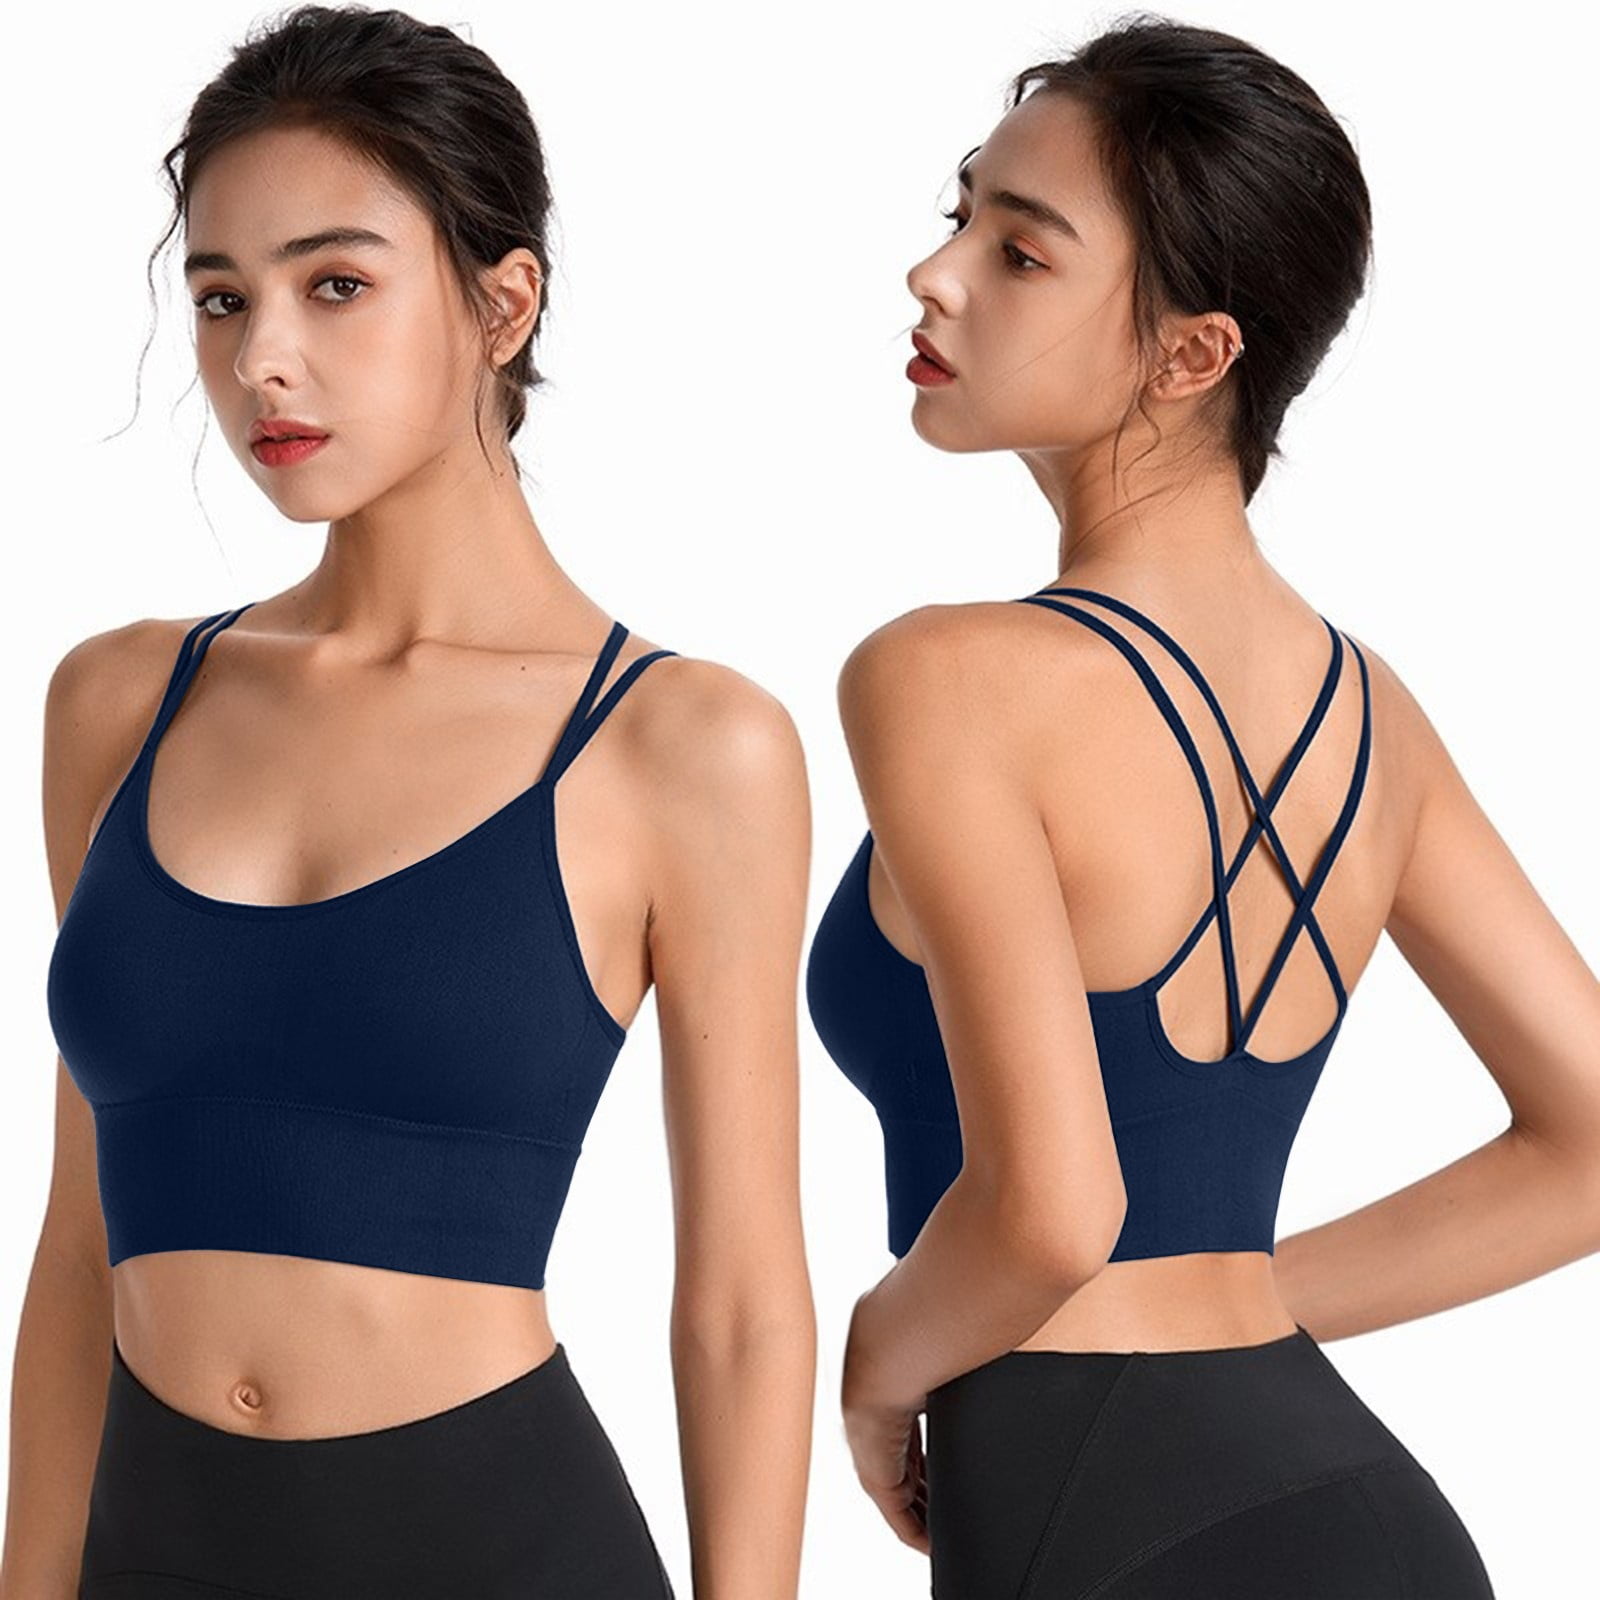 CAICJ98 Sports Bras for Women High Neck Supportive Sports Bra High Impact -  No Bounce Soft Moisture Wicking for Running Racerback Plus Size Navy,XXL 